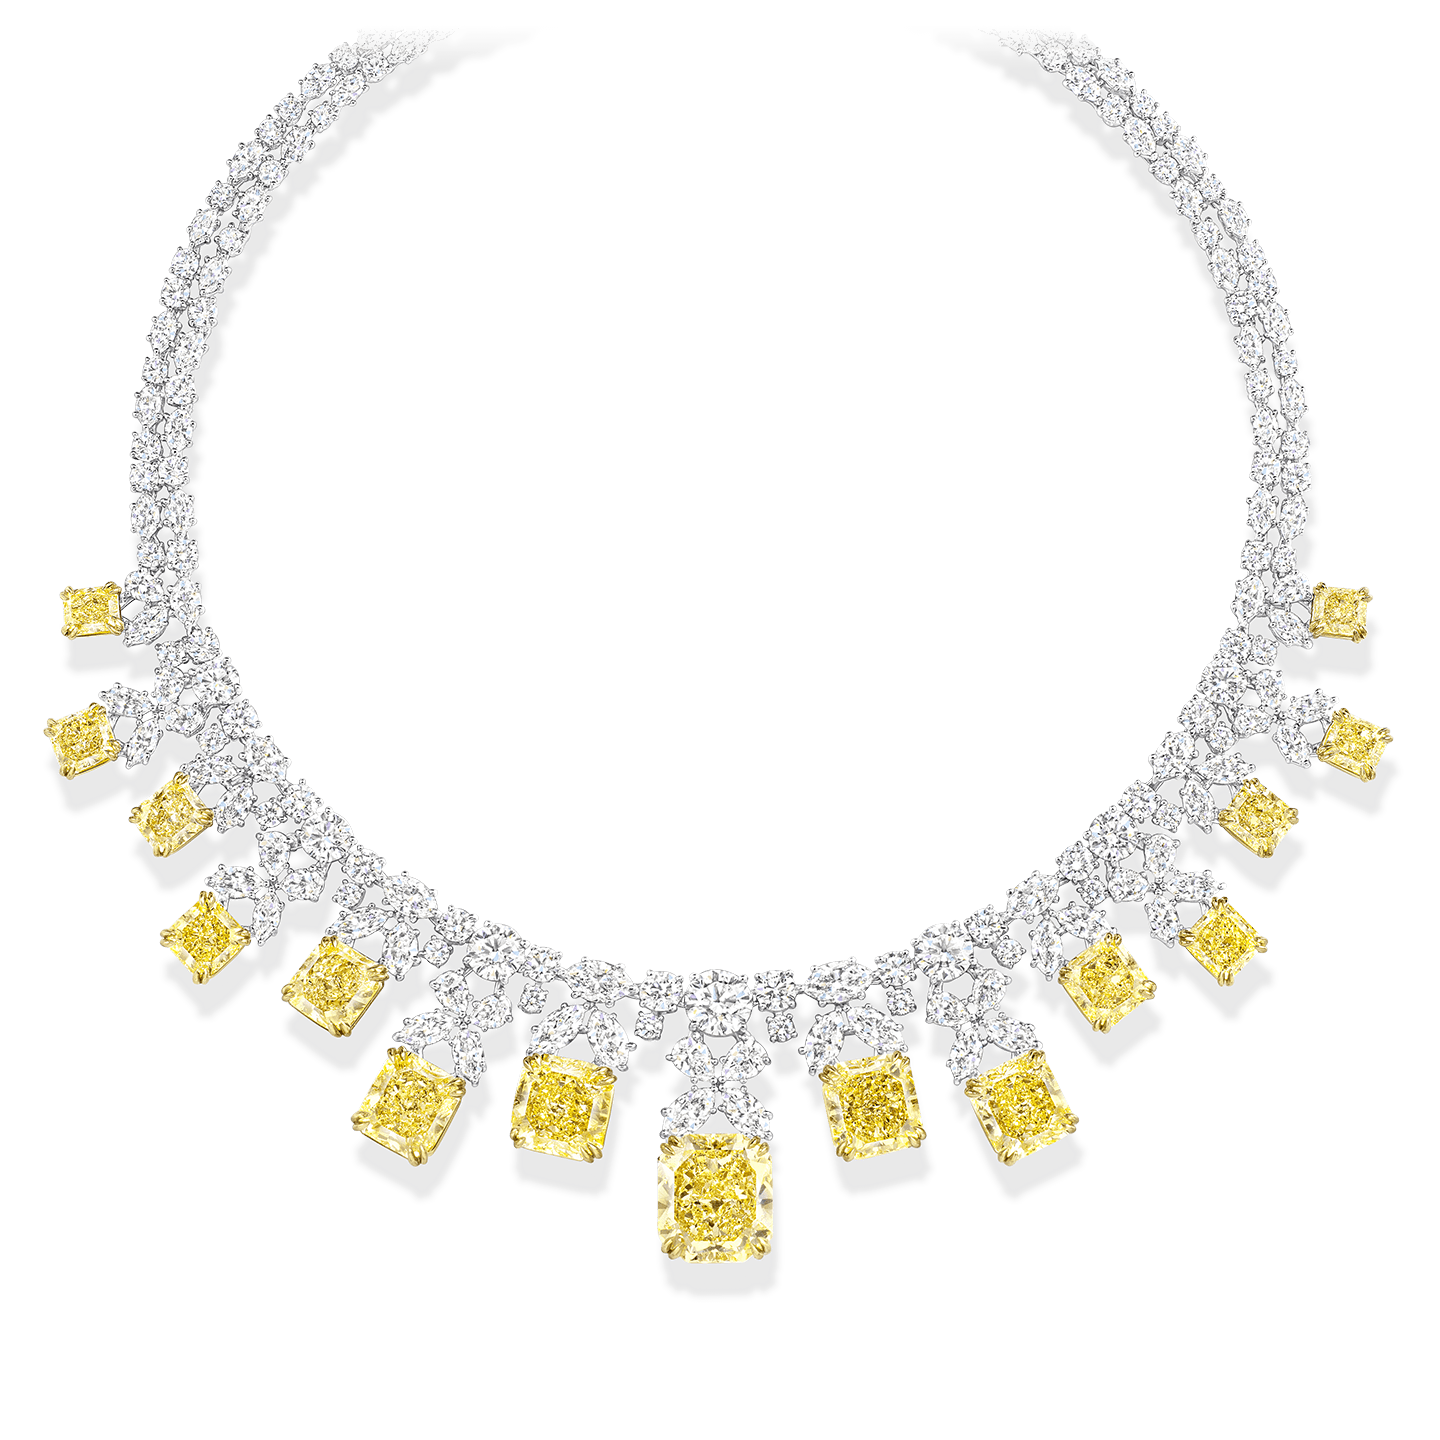 A necklace featuring w15 radiant-cut fancy yellow diamonds weighing a total of approximately 53.50 carats with 186 marquise, pear-shaped, and round brilliant colorless diamonds, set in platinum and 18 karat yellow gold